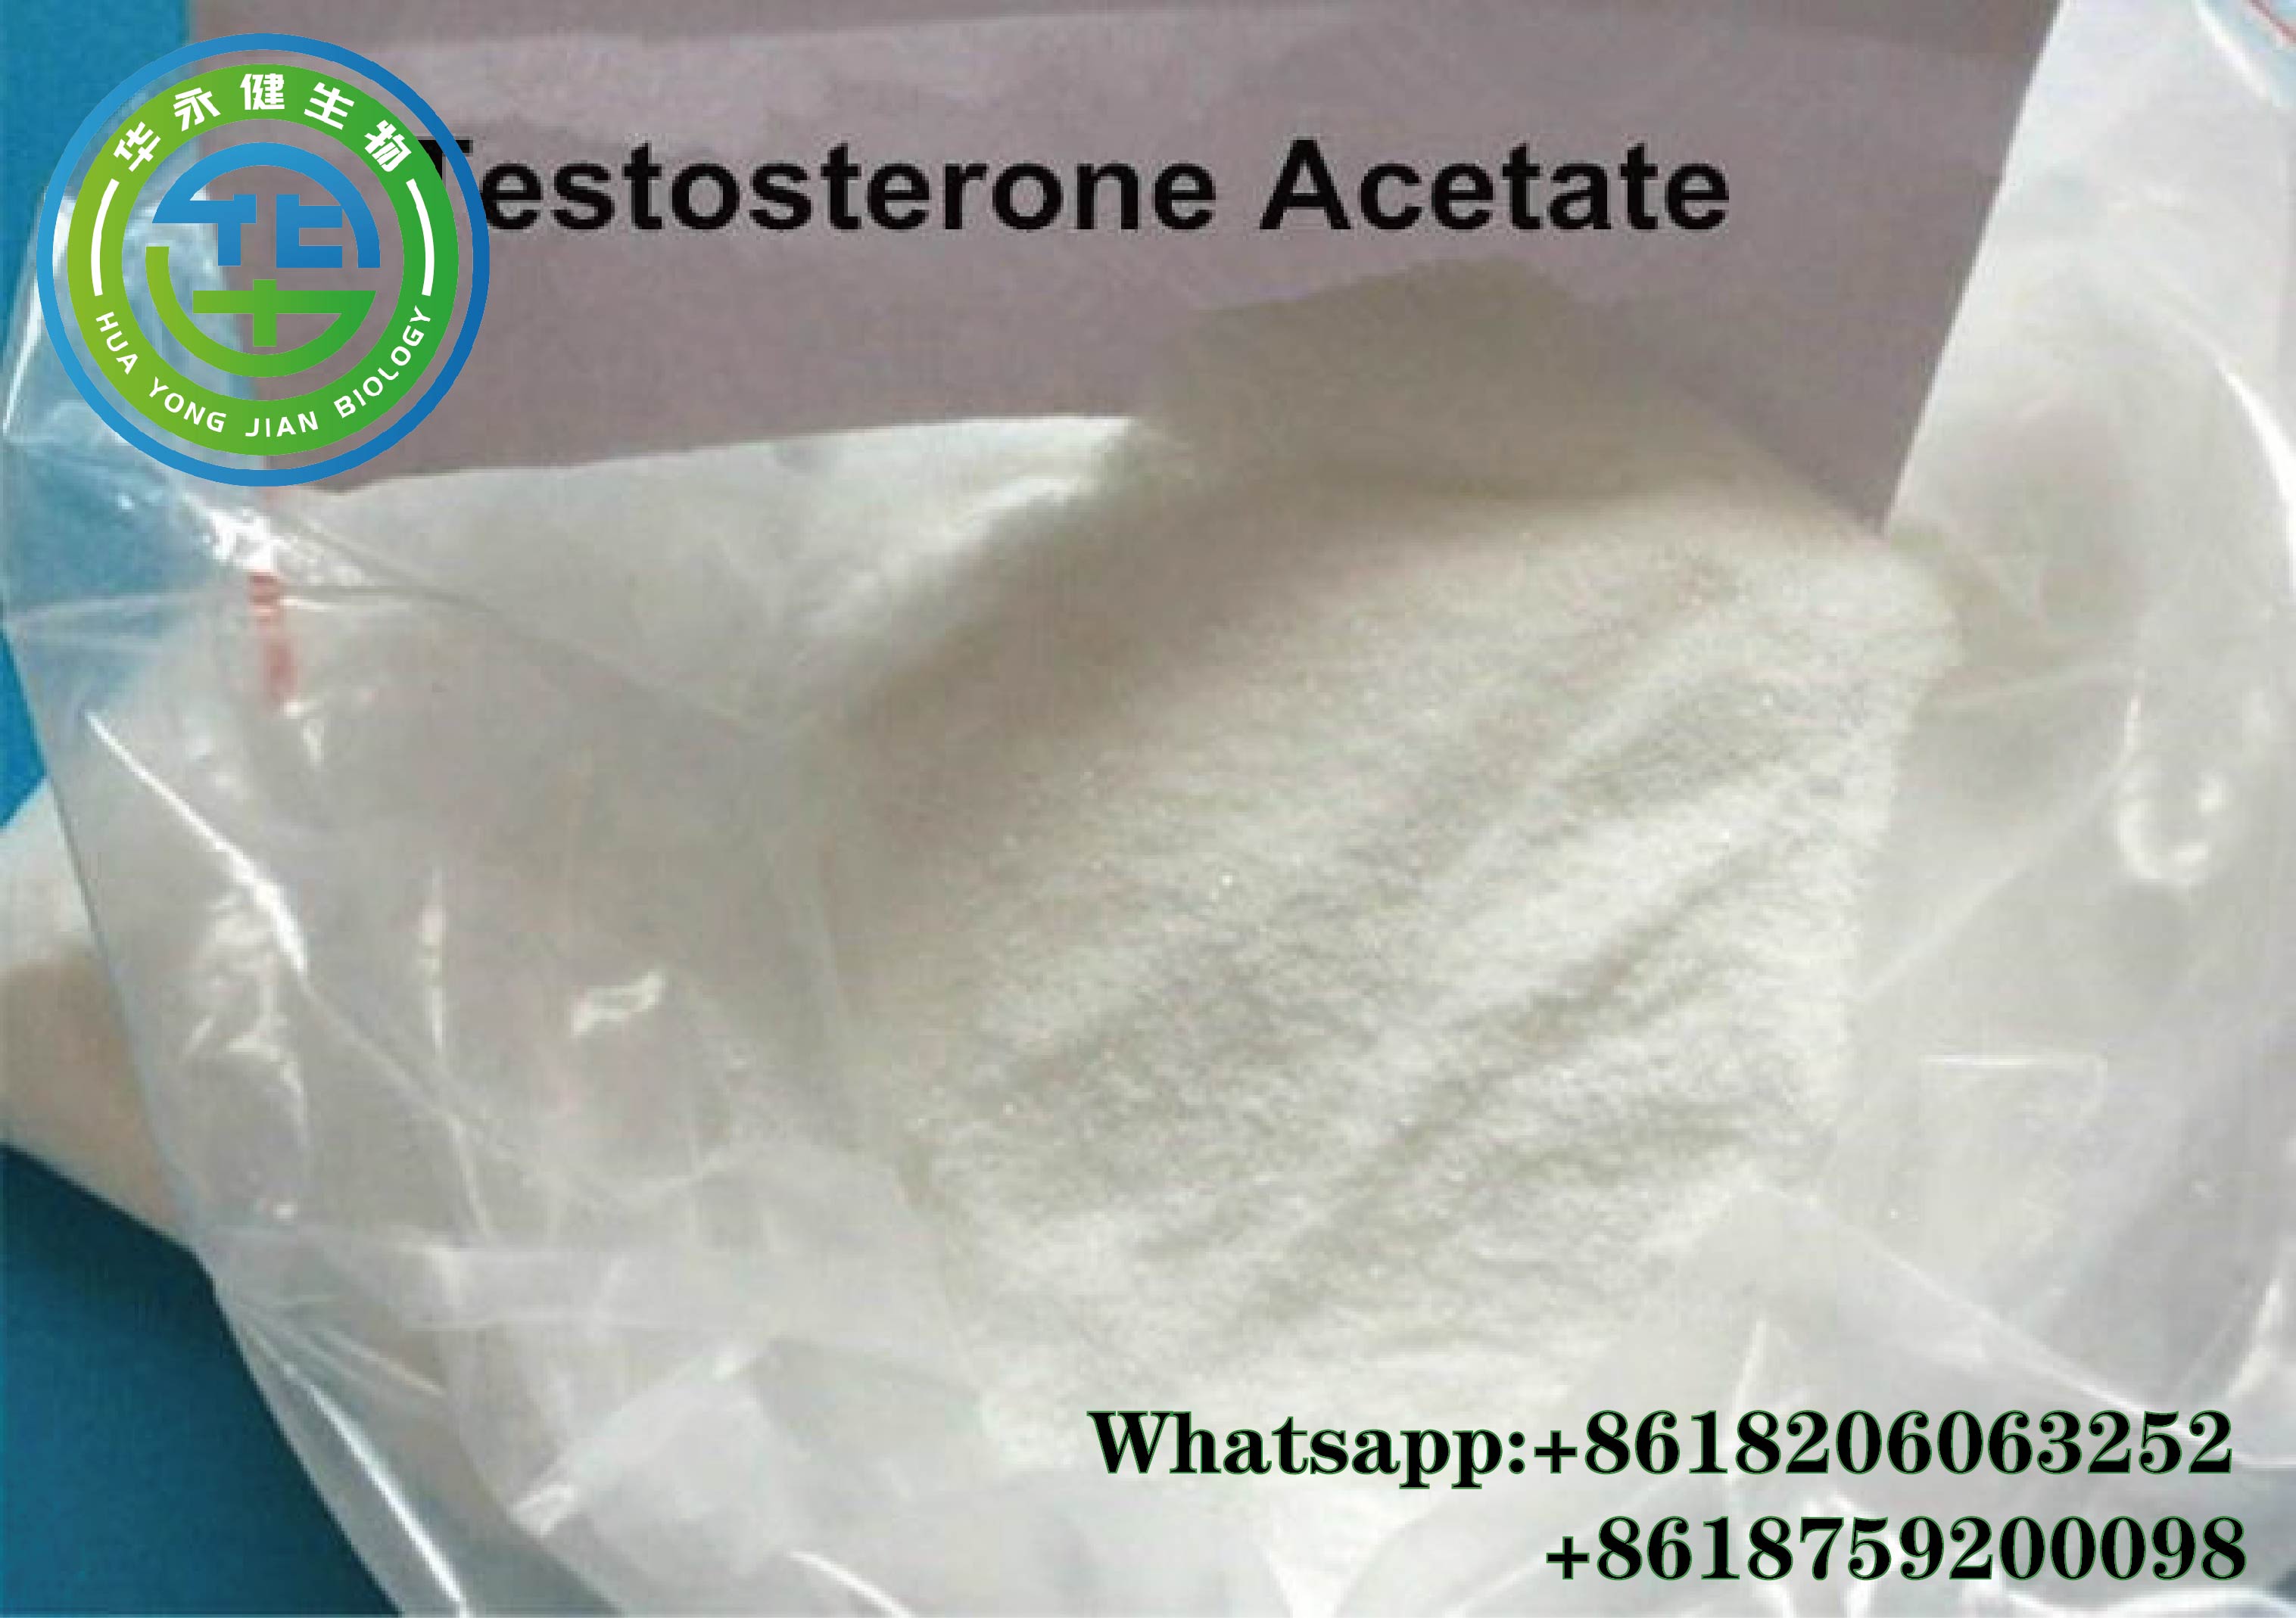 China Best Seller Raw Powder Abolic Testosterone Acetate for Muscle Gain and Bodybuilding with Fast Delivery to America